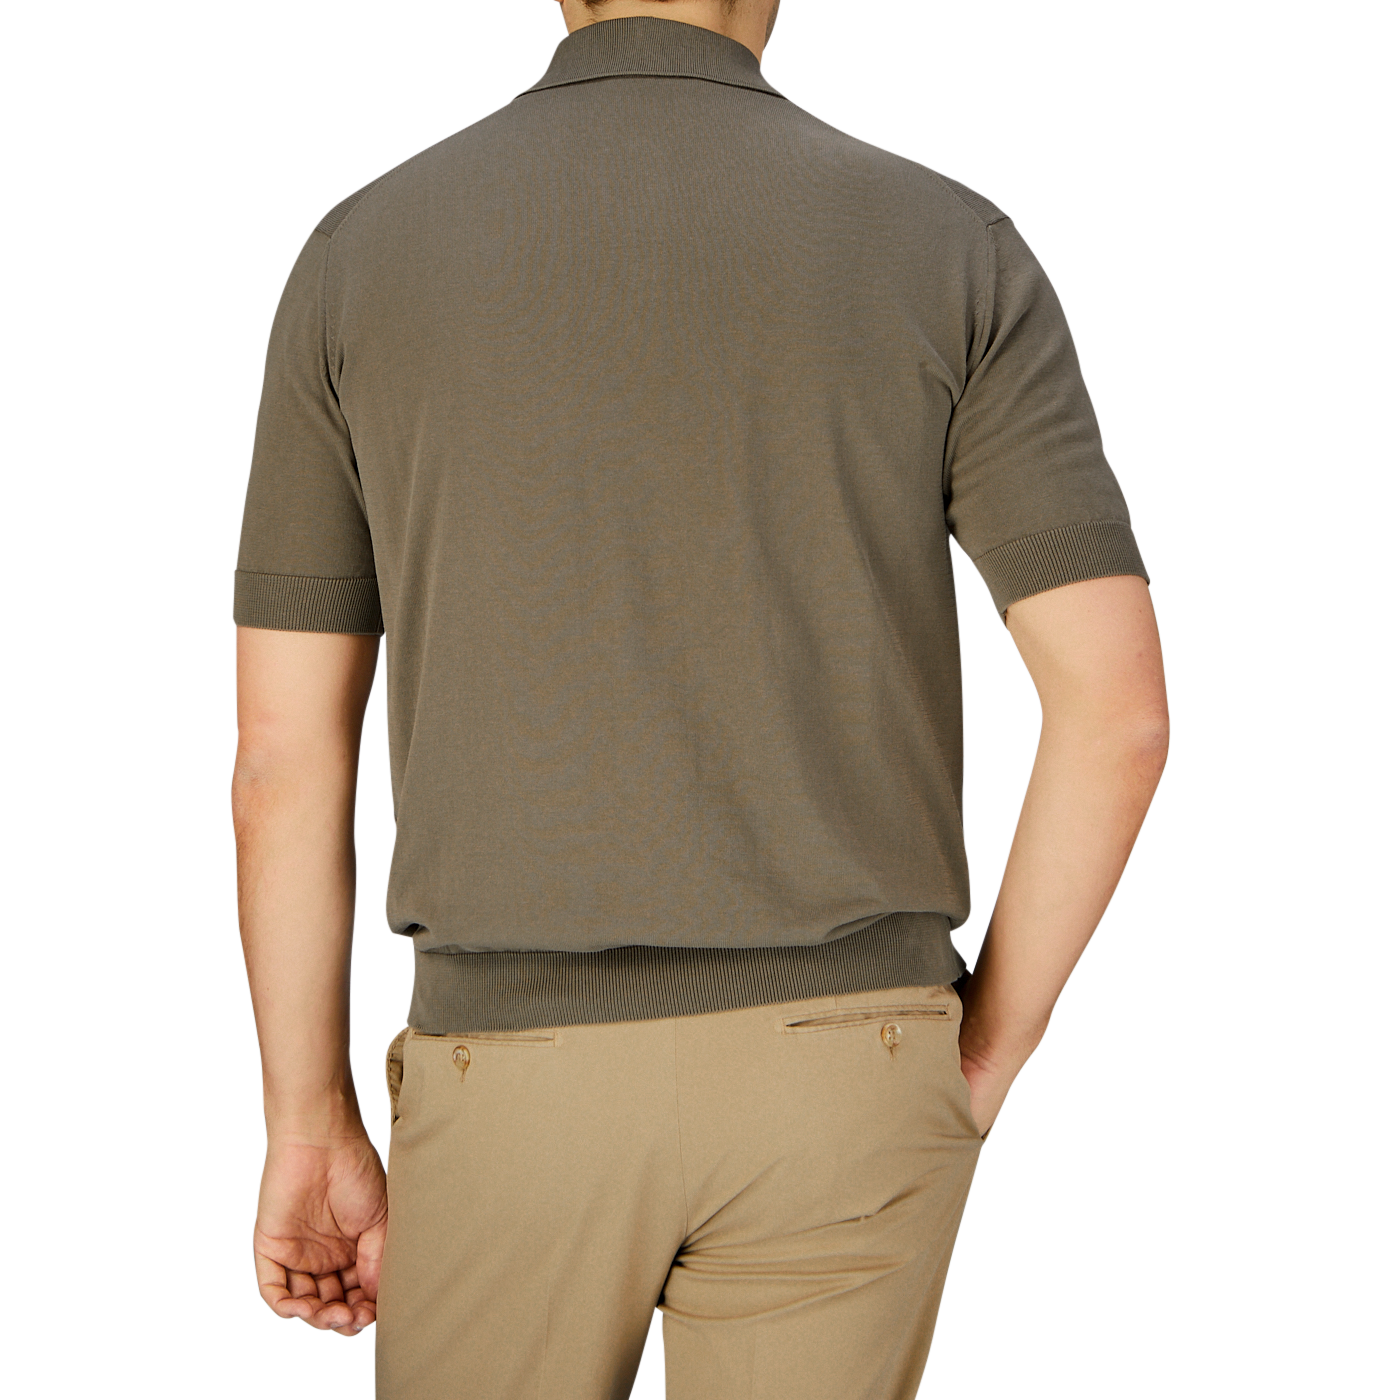 Man seen from the back wearing a seasonal Filippo de Laurentiis olive green crepe cotton polo shirt and beige crepe cotton pants.